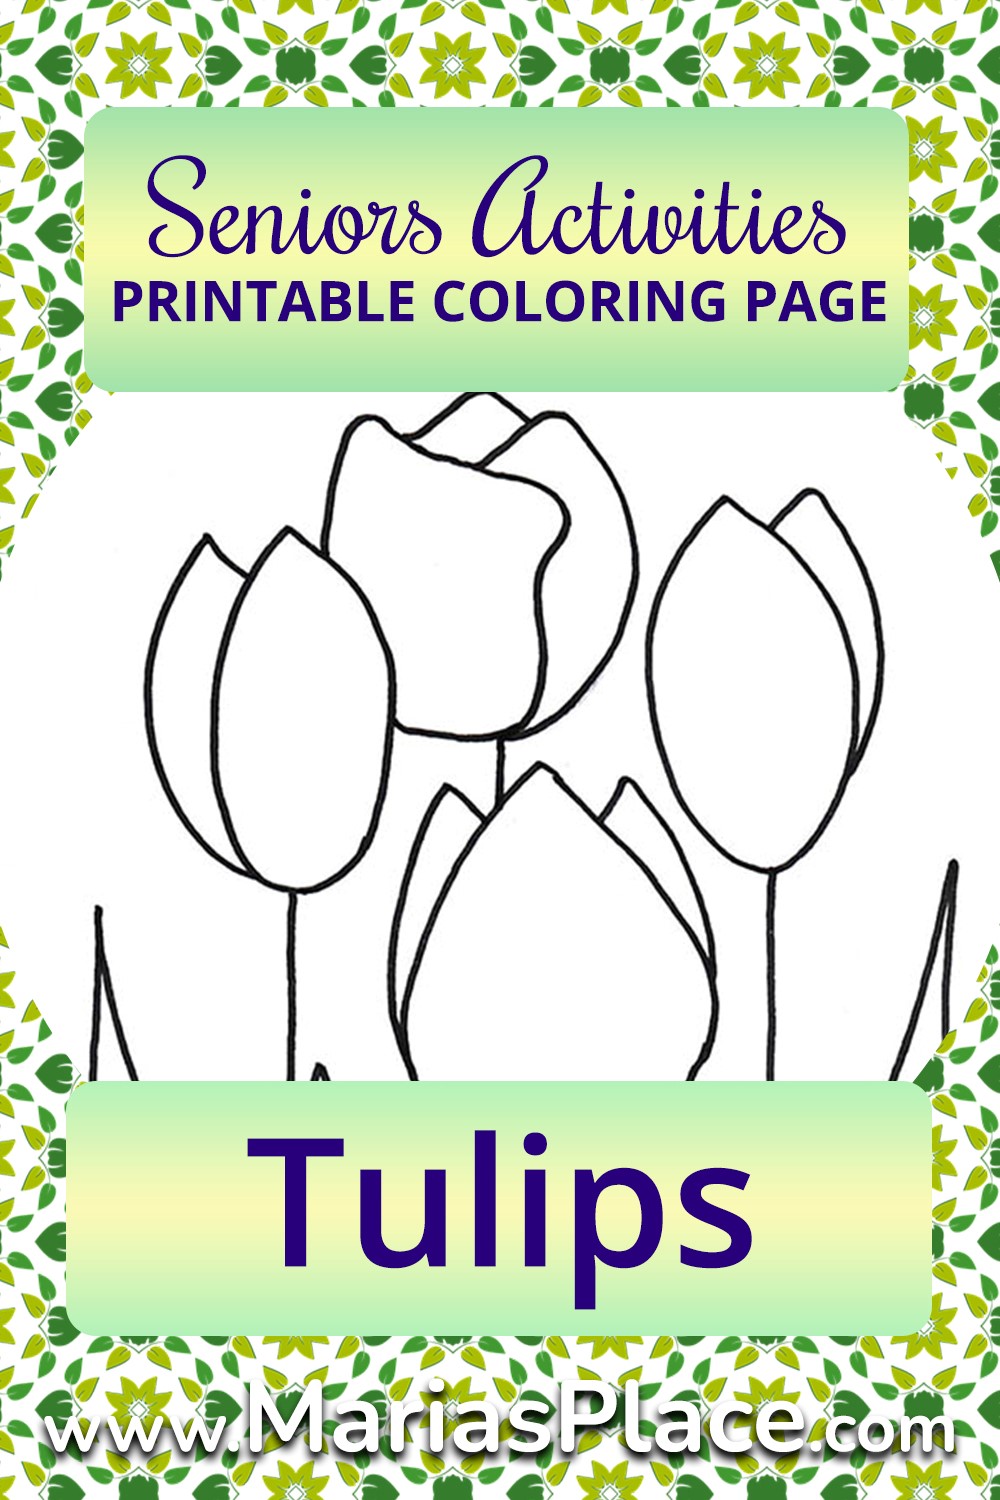 Coloring – Tulips